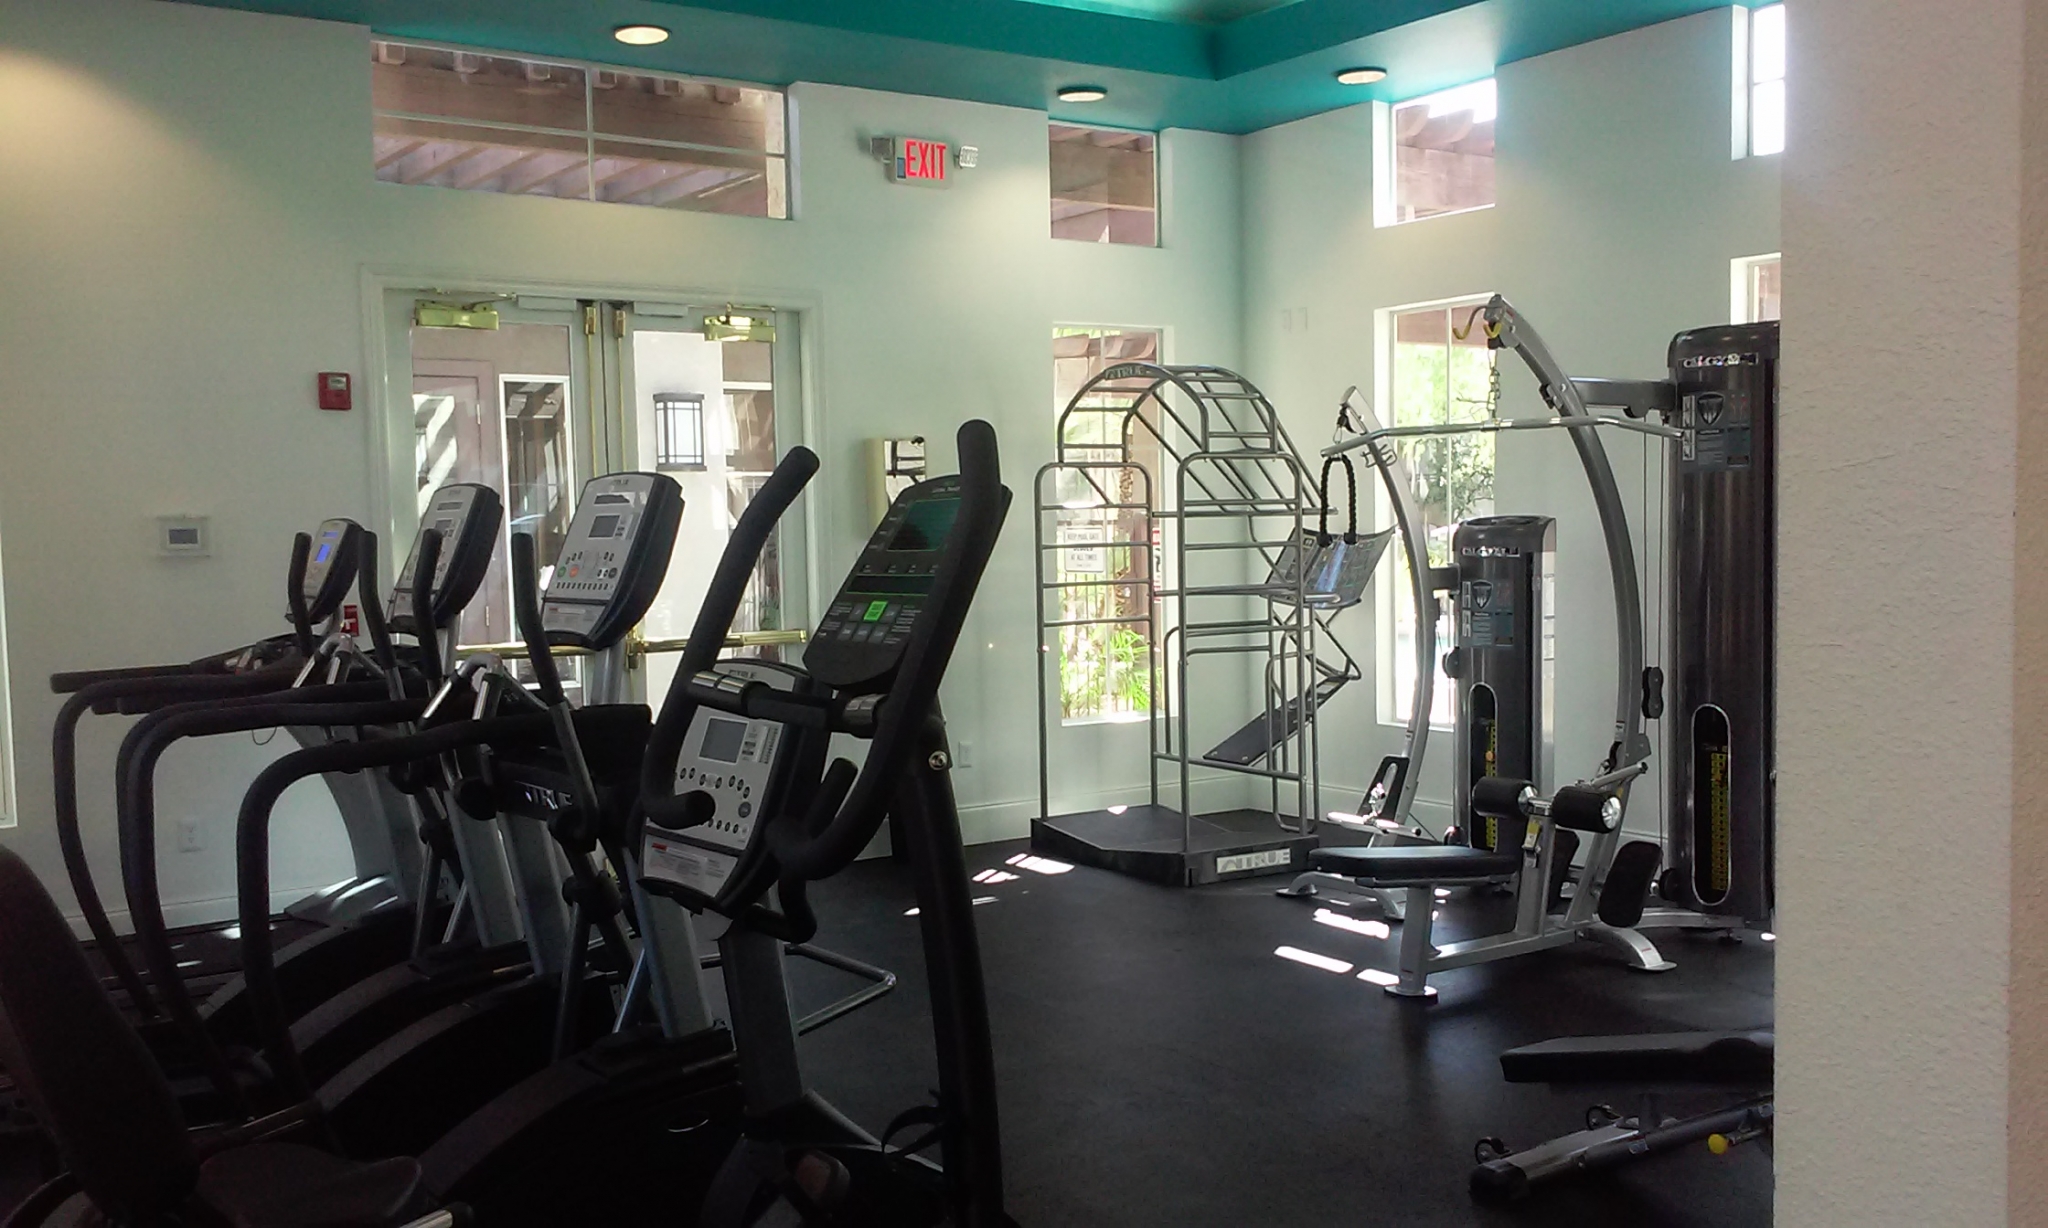 State-of-the-Art Fitness Center